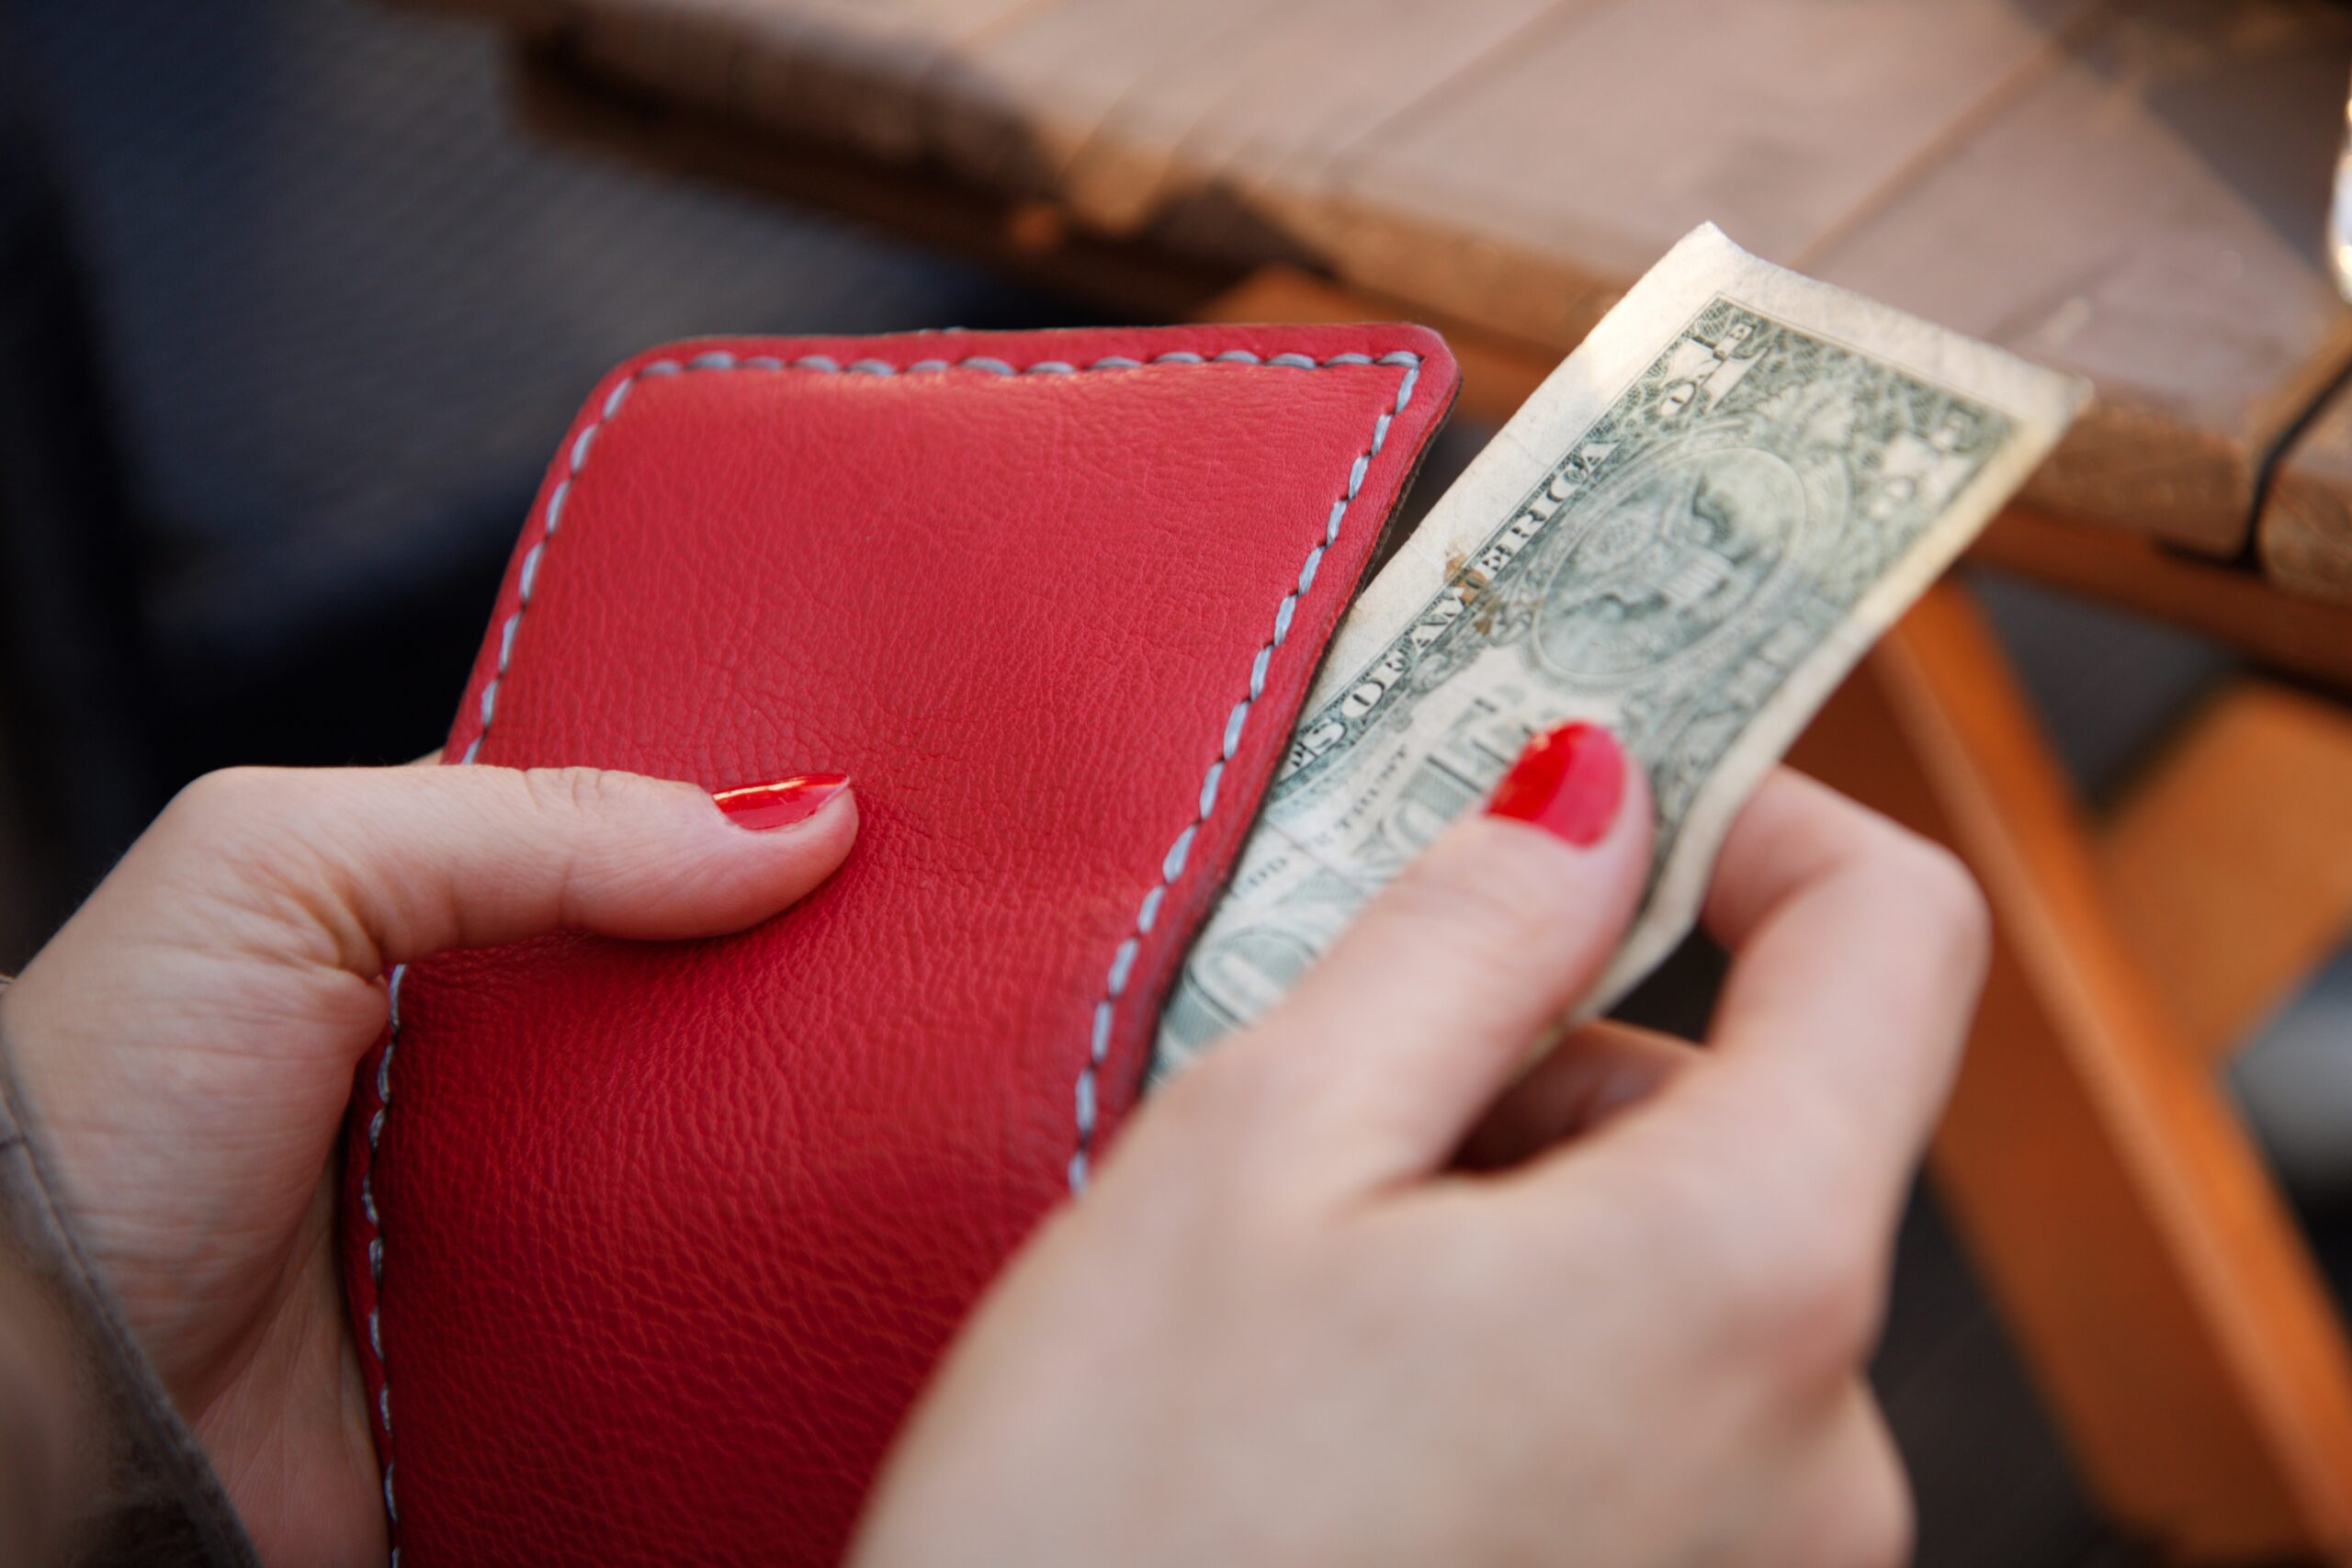 A woman taking a bill out of her wallet